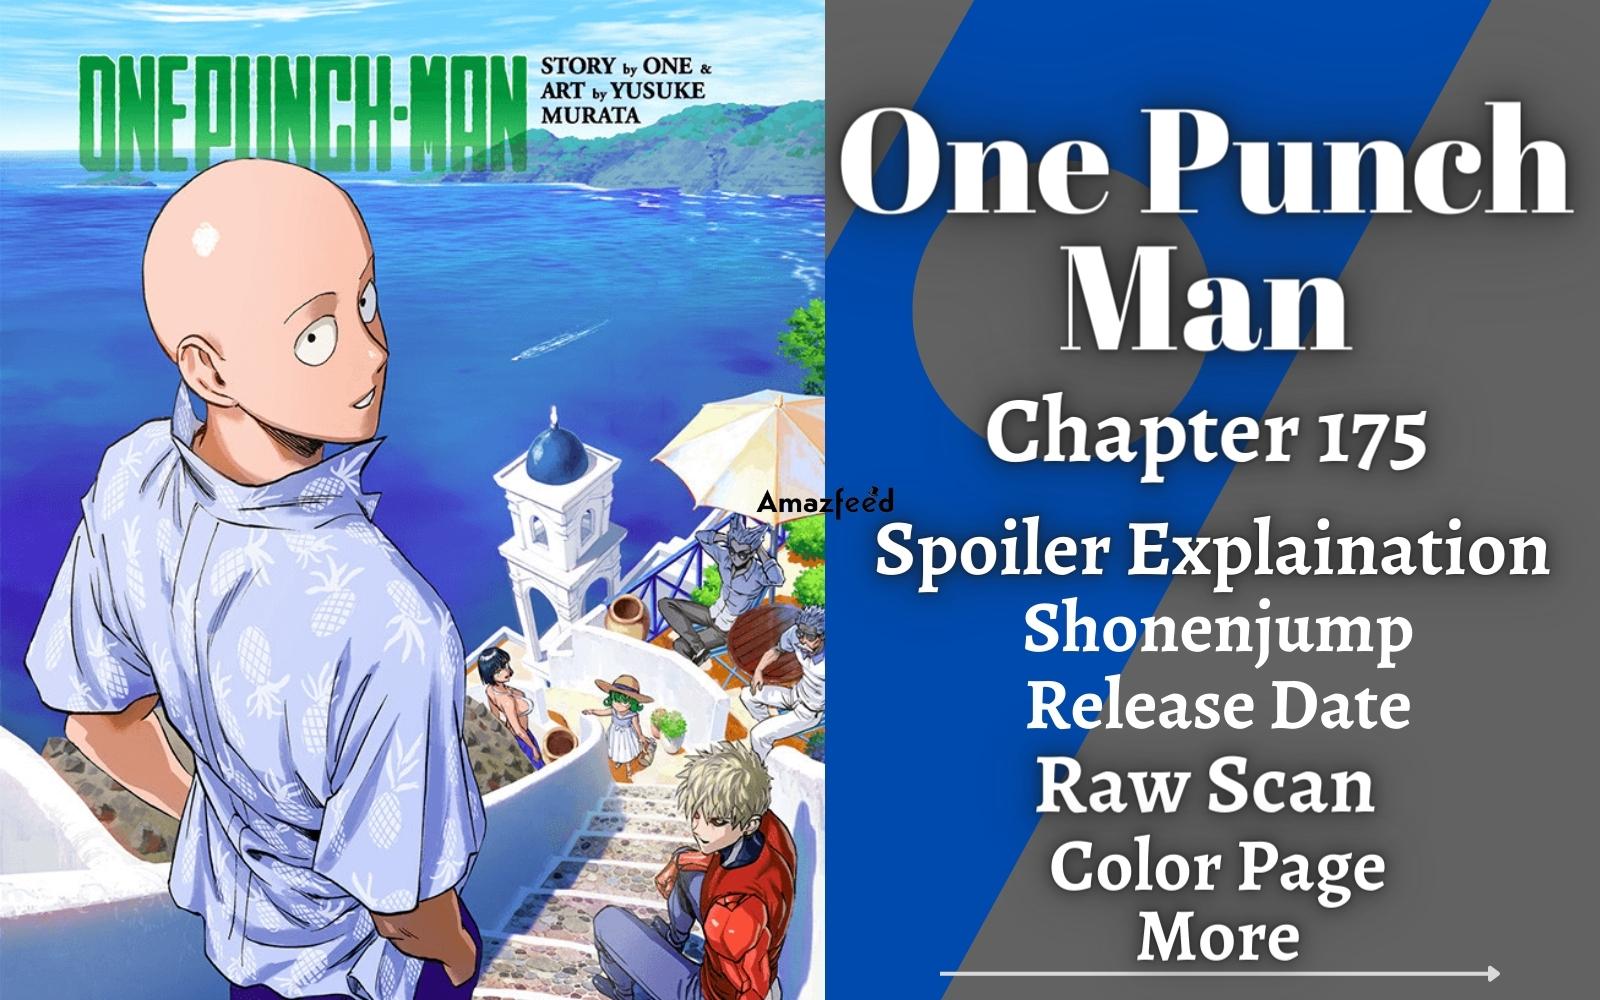 One Punch Man Chapter 175 Full Spoiler Explaination, Shonenjump Release Date, Raw Scan, Color Page & More